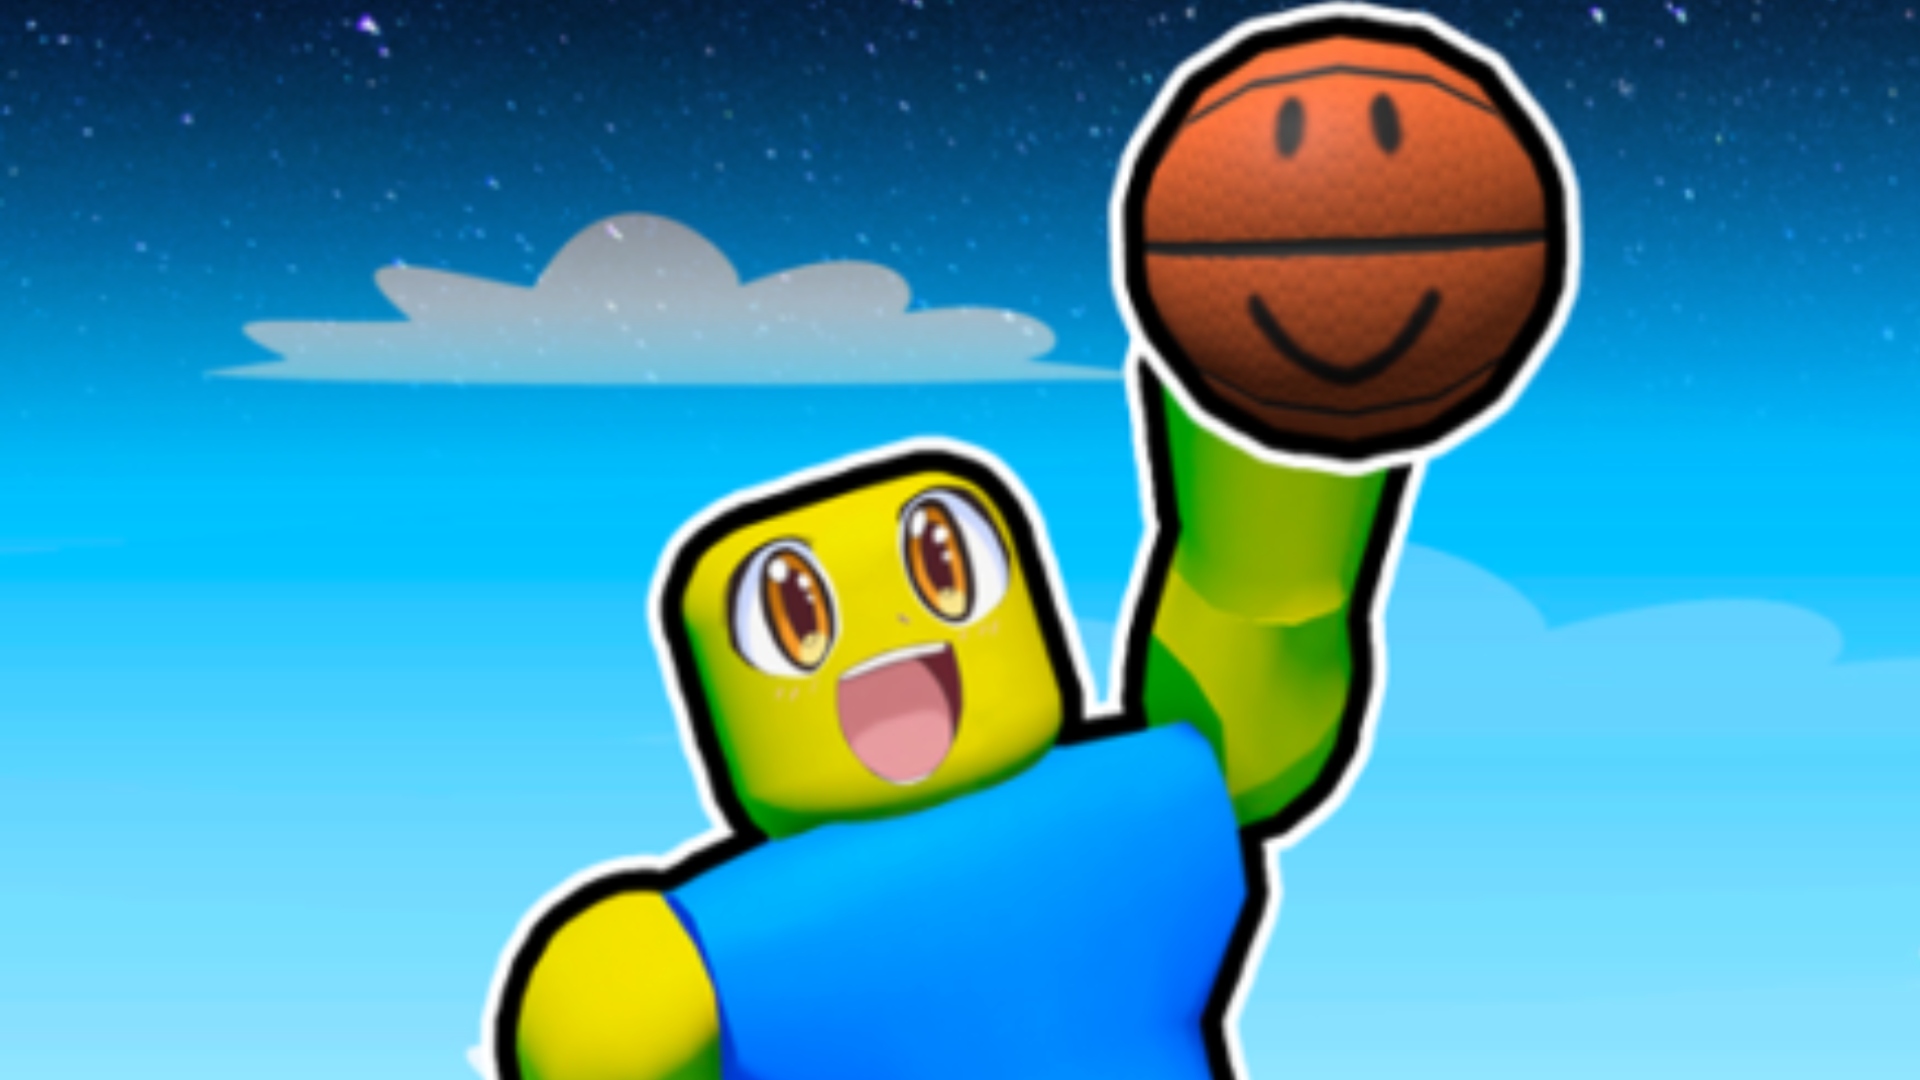 Roblox Super Dunk Codes for Free Perks and More – December 2023